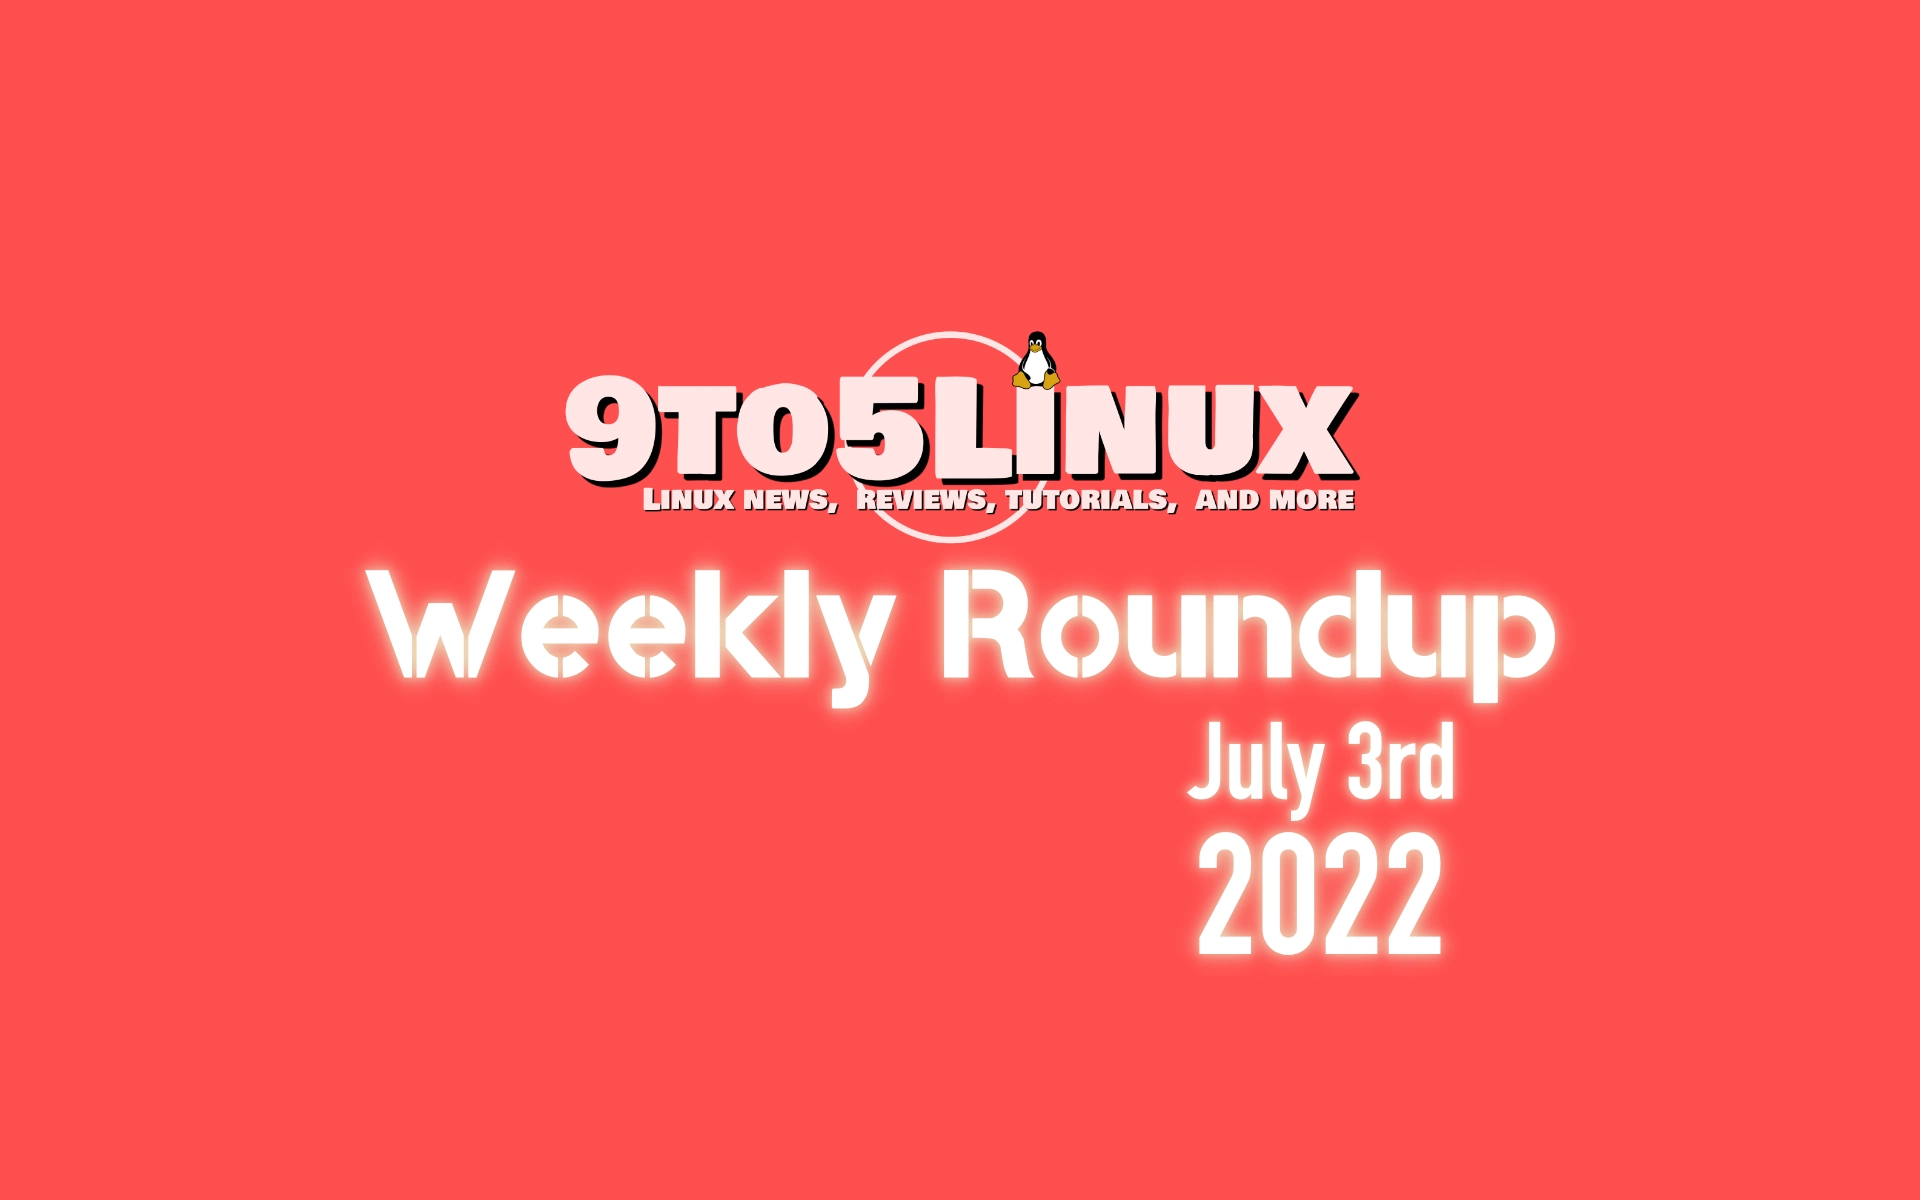 9to5Linux Weekly Roundup: July 3rd, 2022